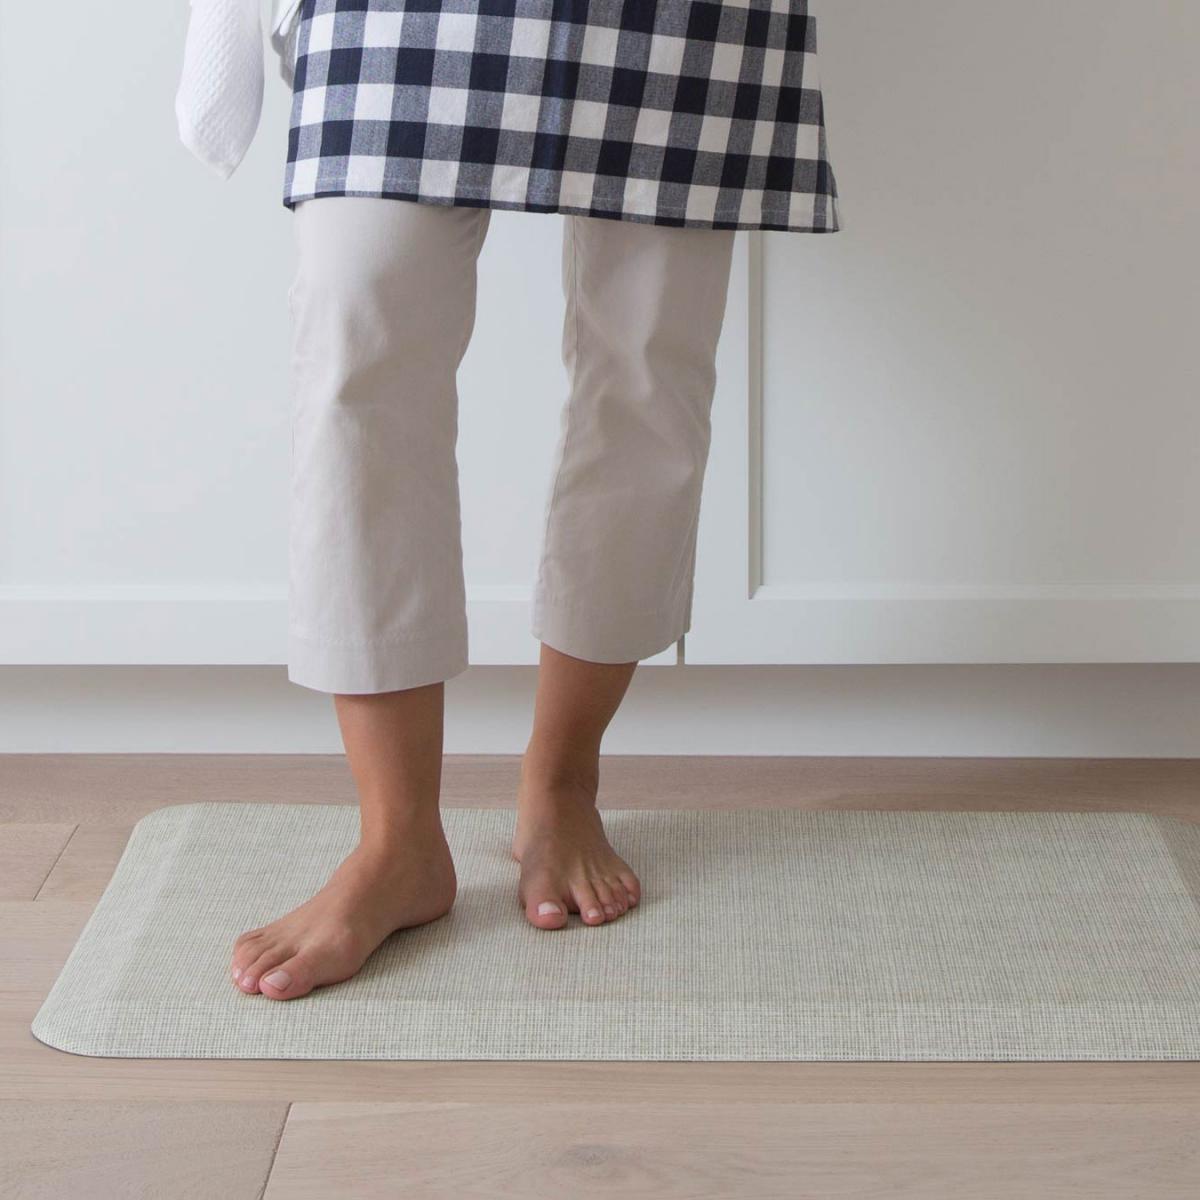 Gel Kitchen Mats: Are They Worth It?